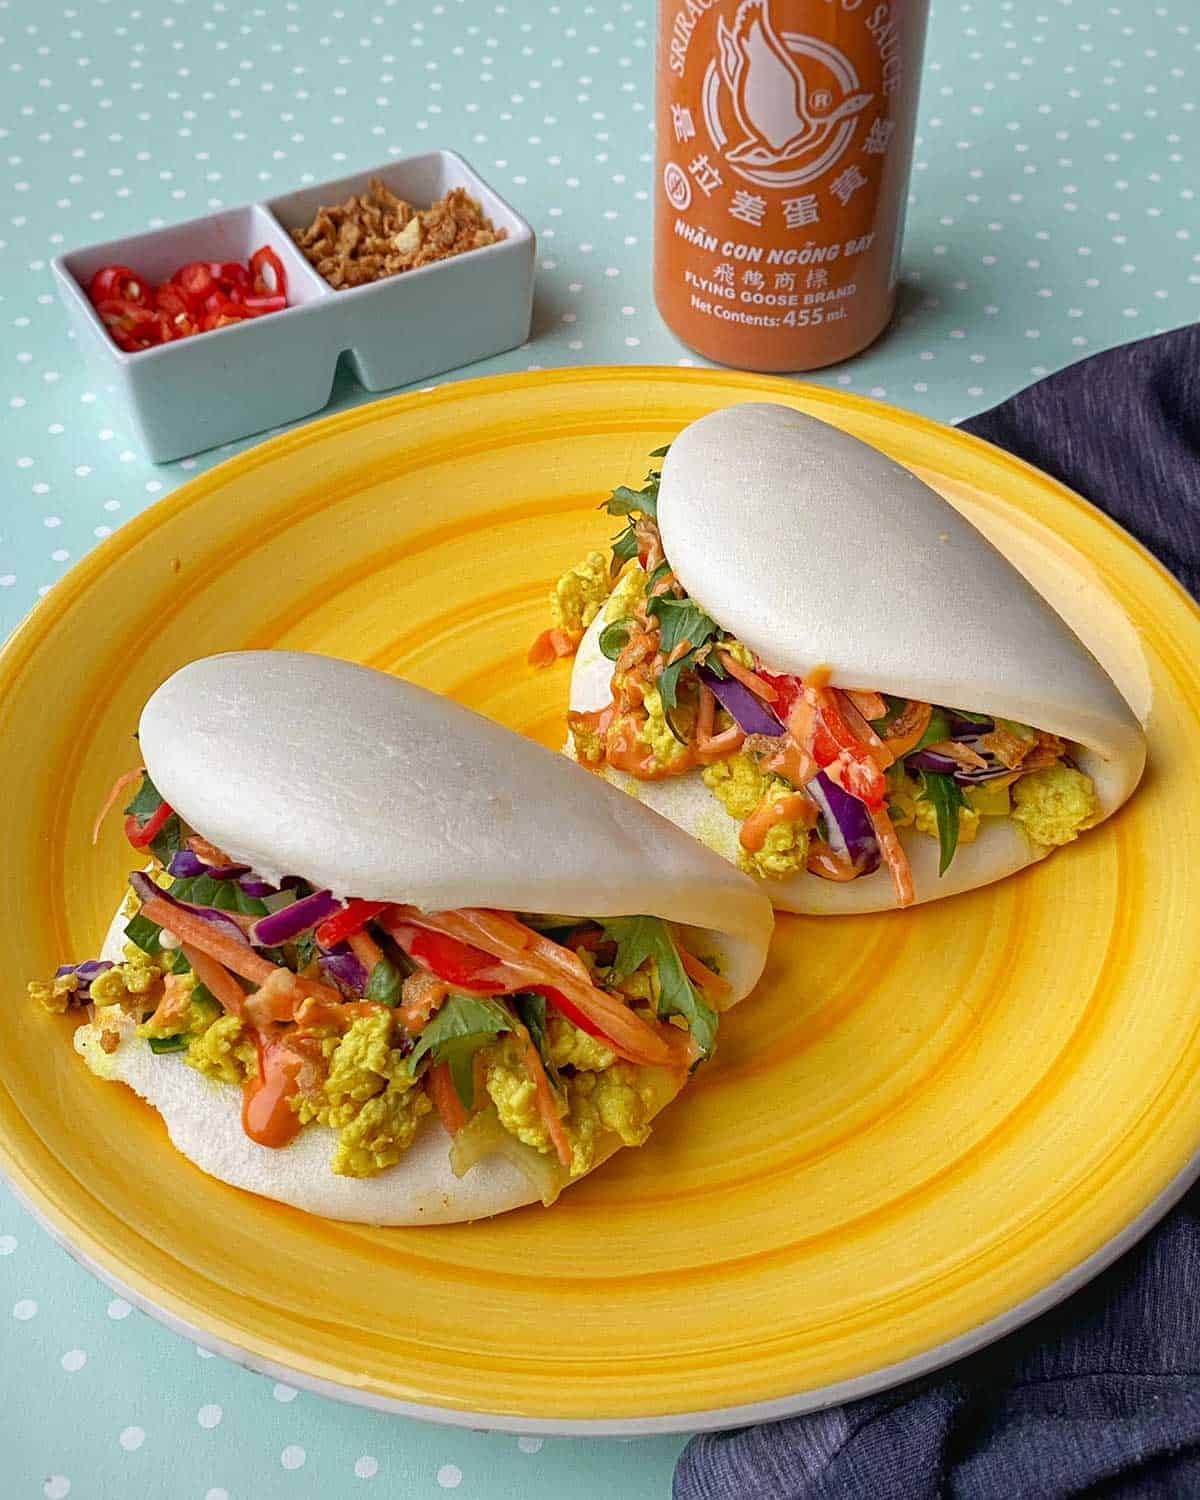 Coconut Chicken Bao Buns sitting on a yellow plate with condiments in the background.